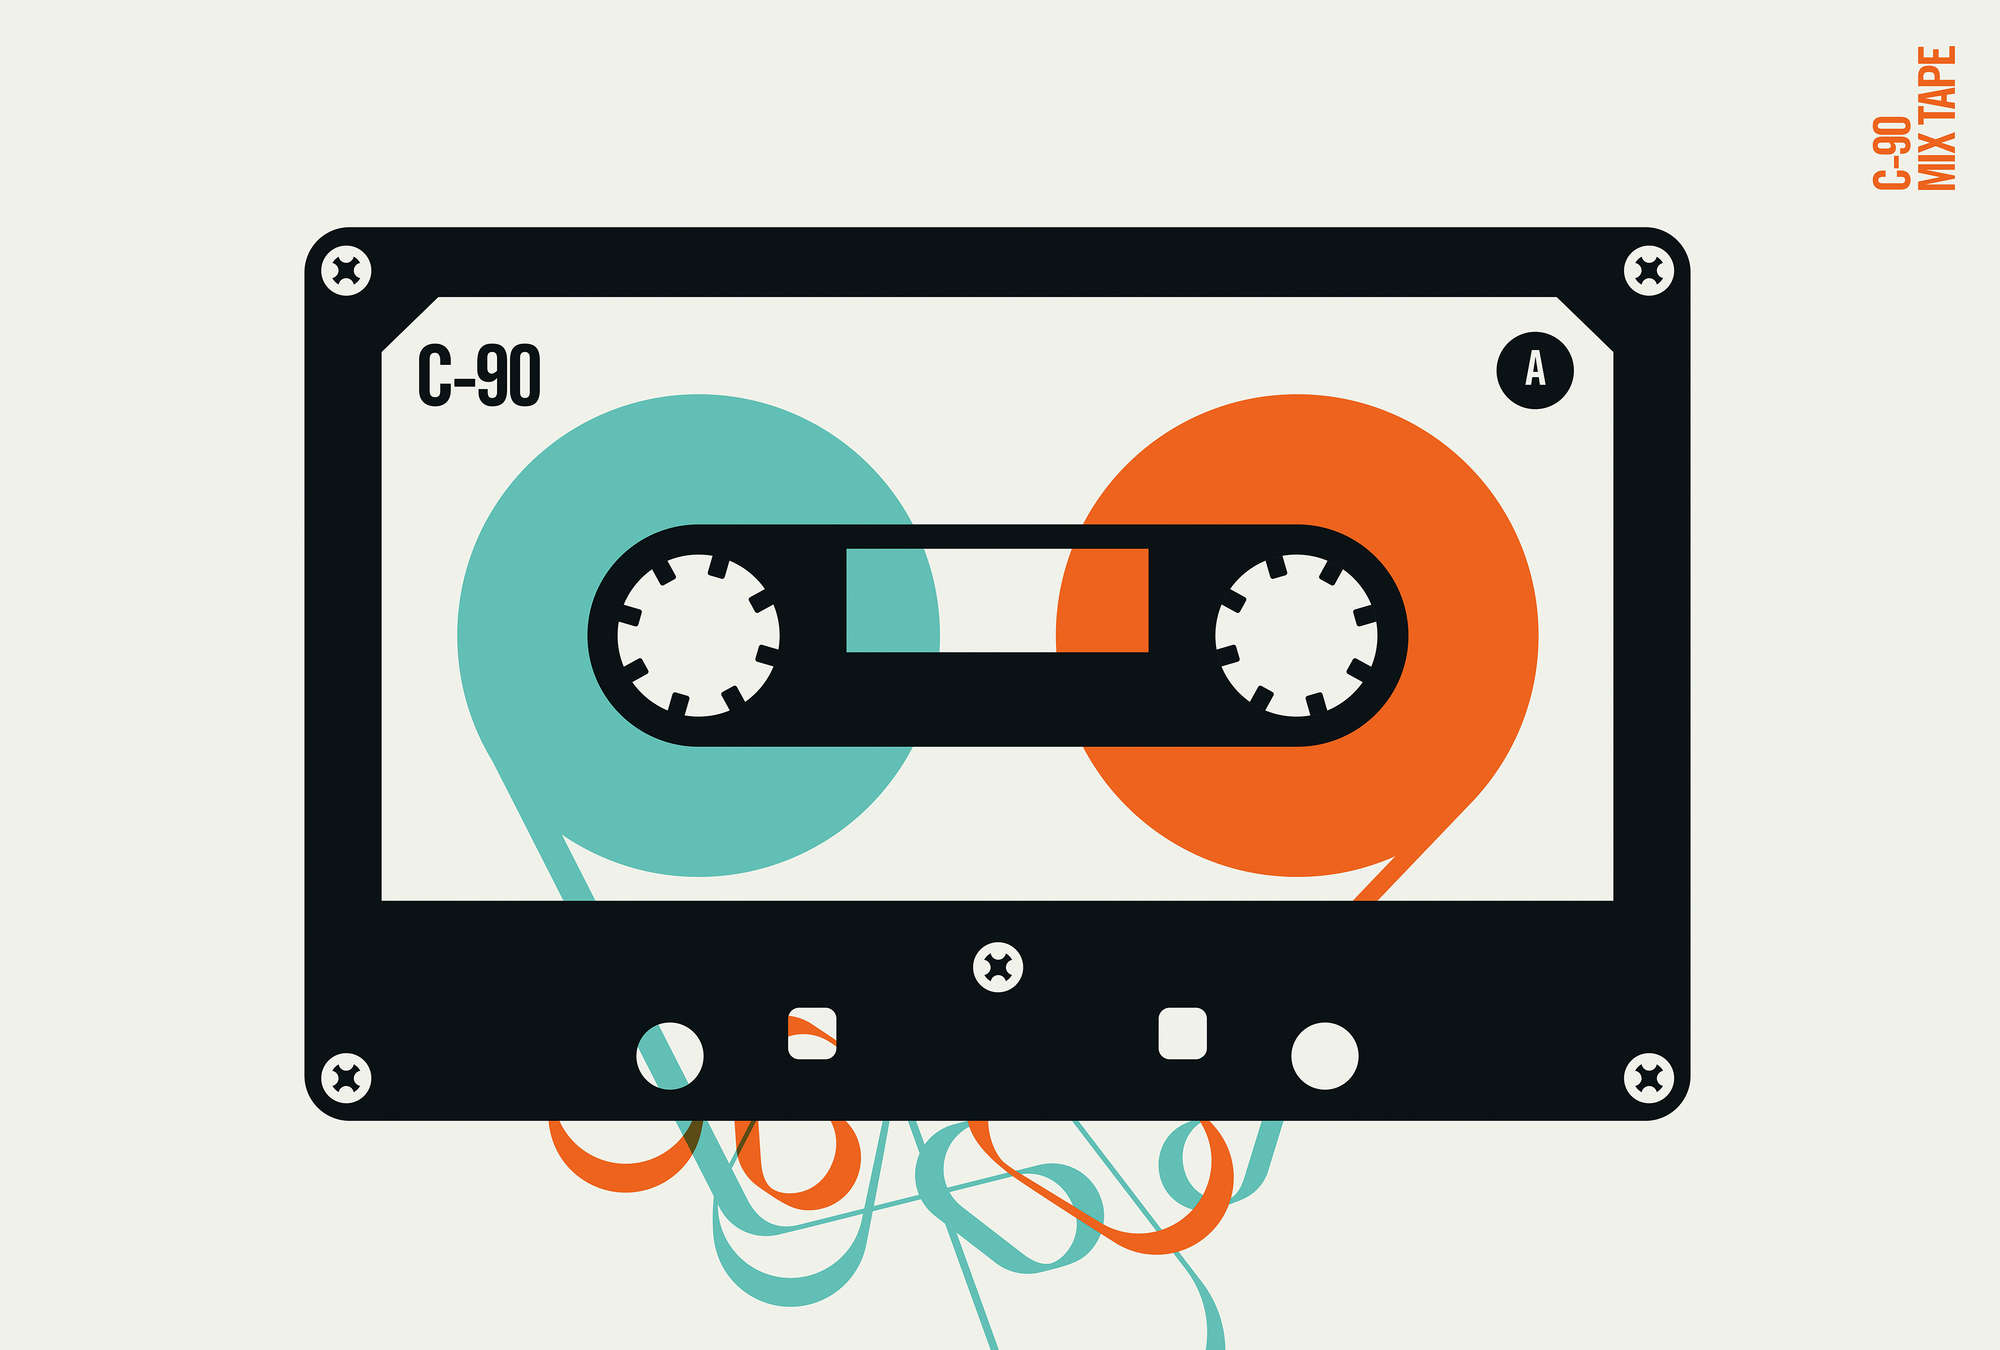             Photo wallpaper MP Mixtape with tape salad in retro style
        